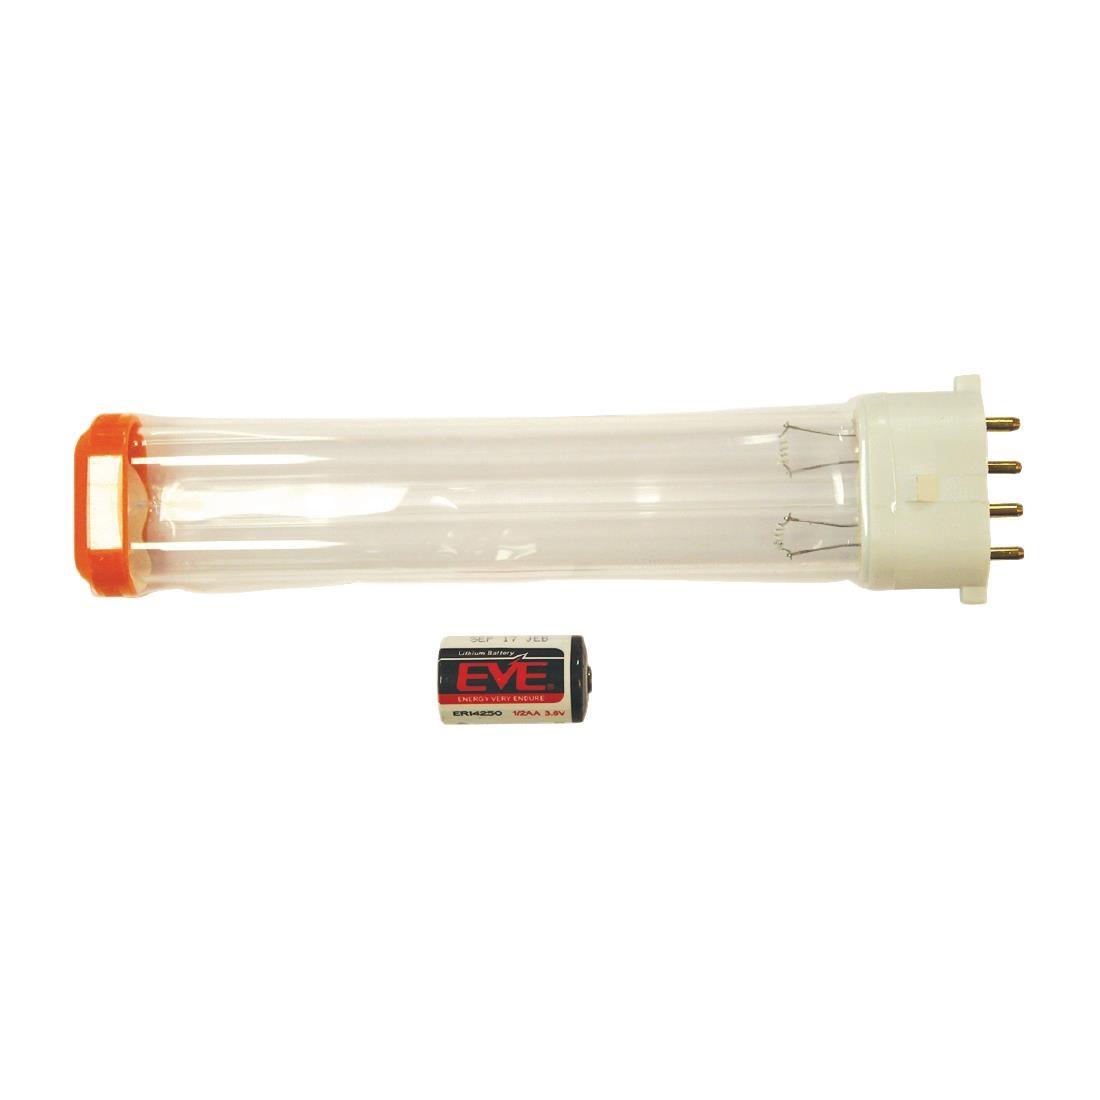 HyGenikx System Shatter-proof Replacement Lamp and Battery Orange Cap HGX-10-F - FE691  - 1